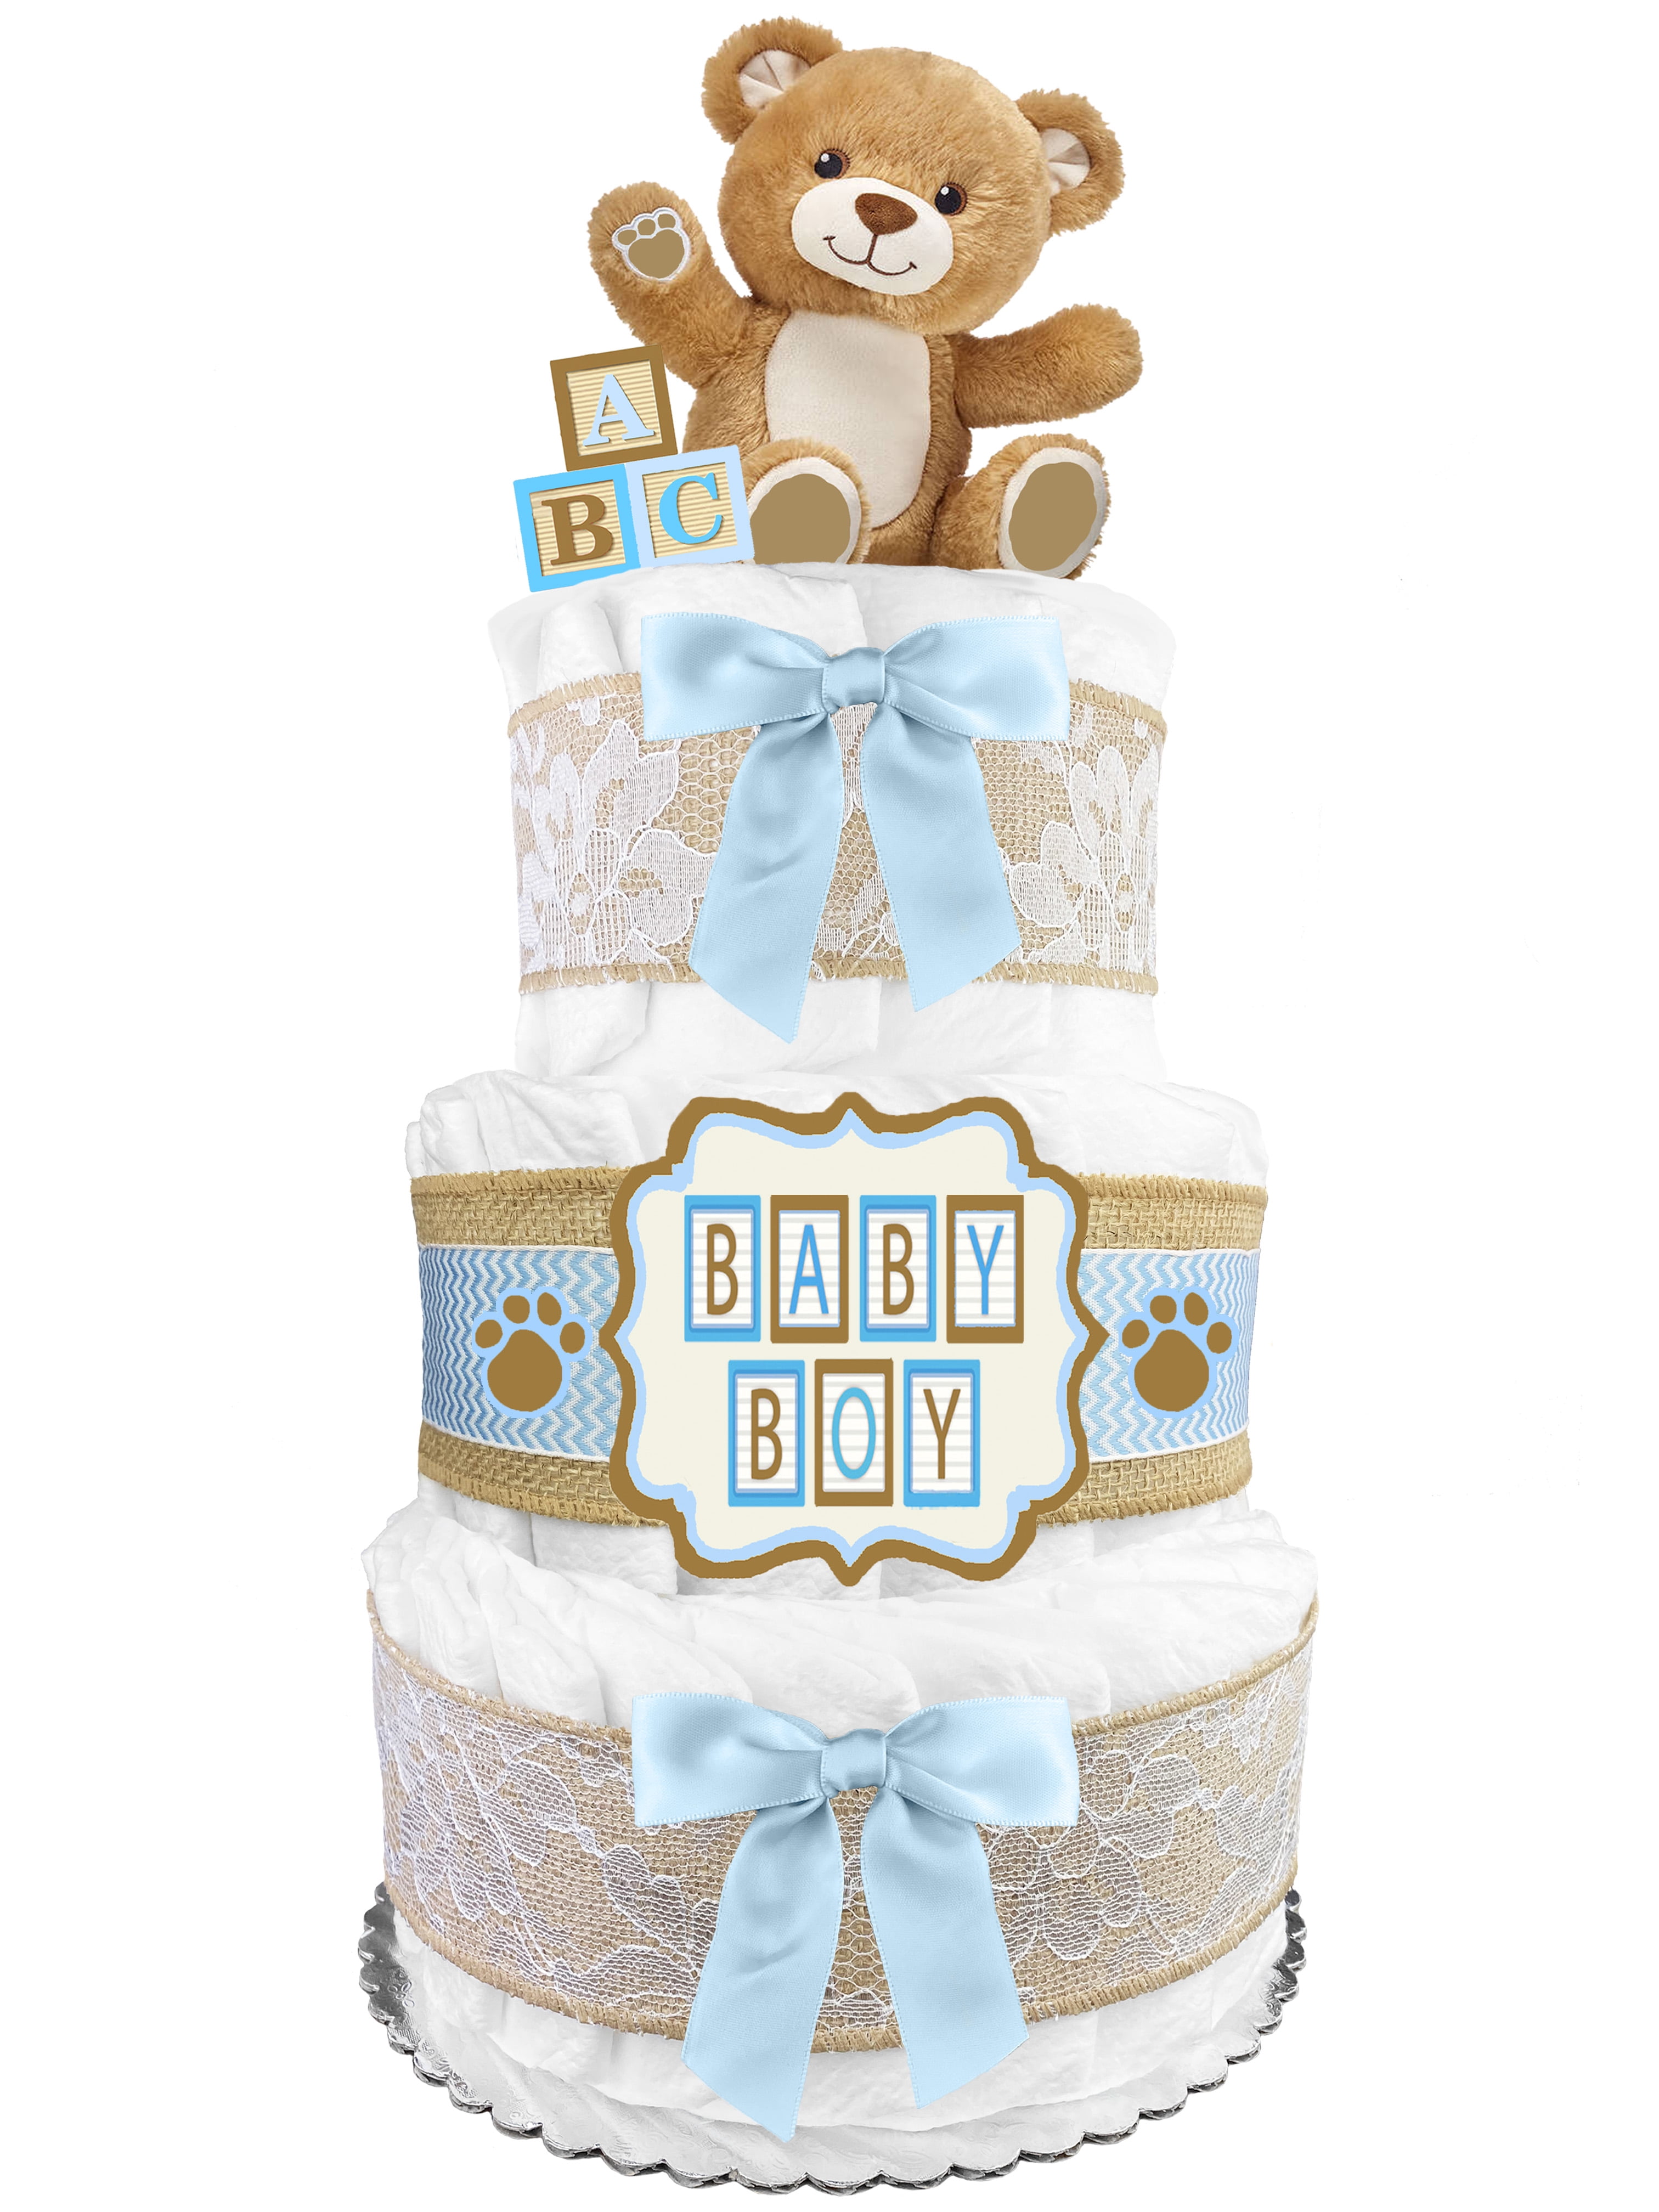 Baby Boy Girl Unisex Two Tier Bath Time Nappy Cake New Born Baby Shower Gift